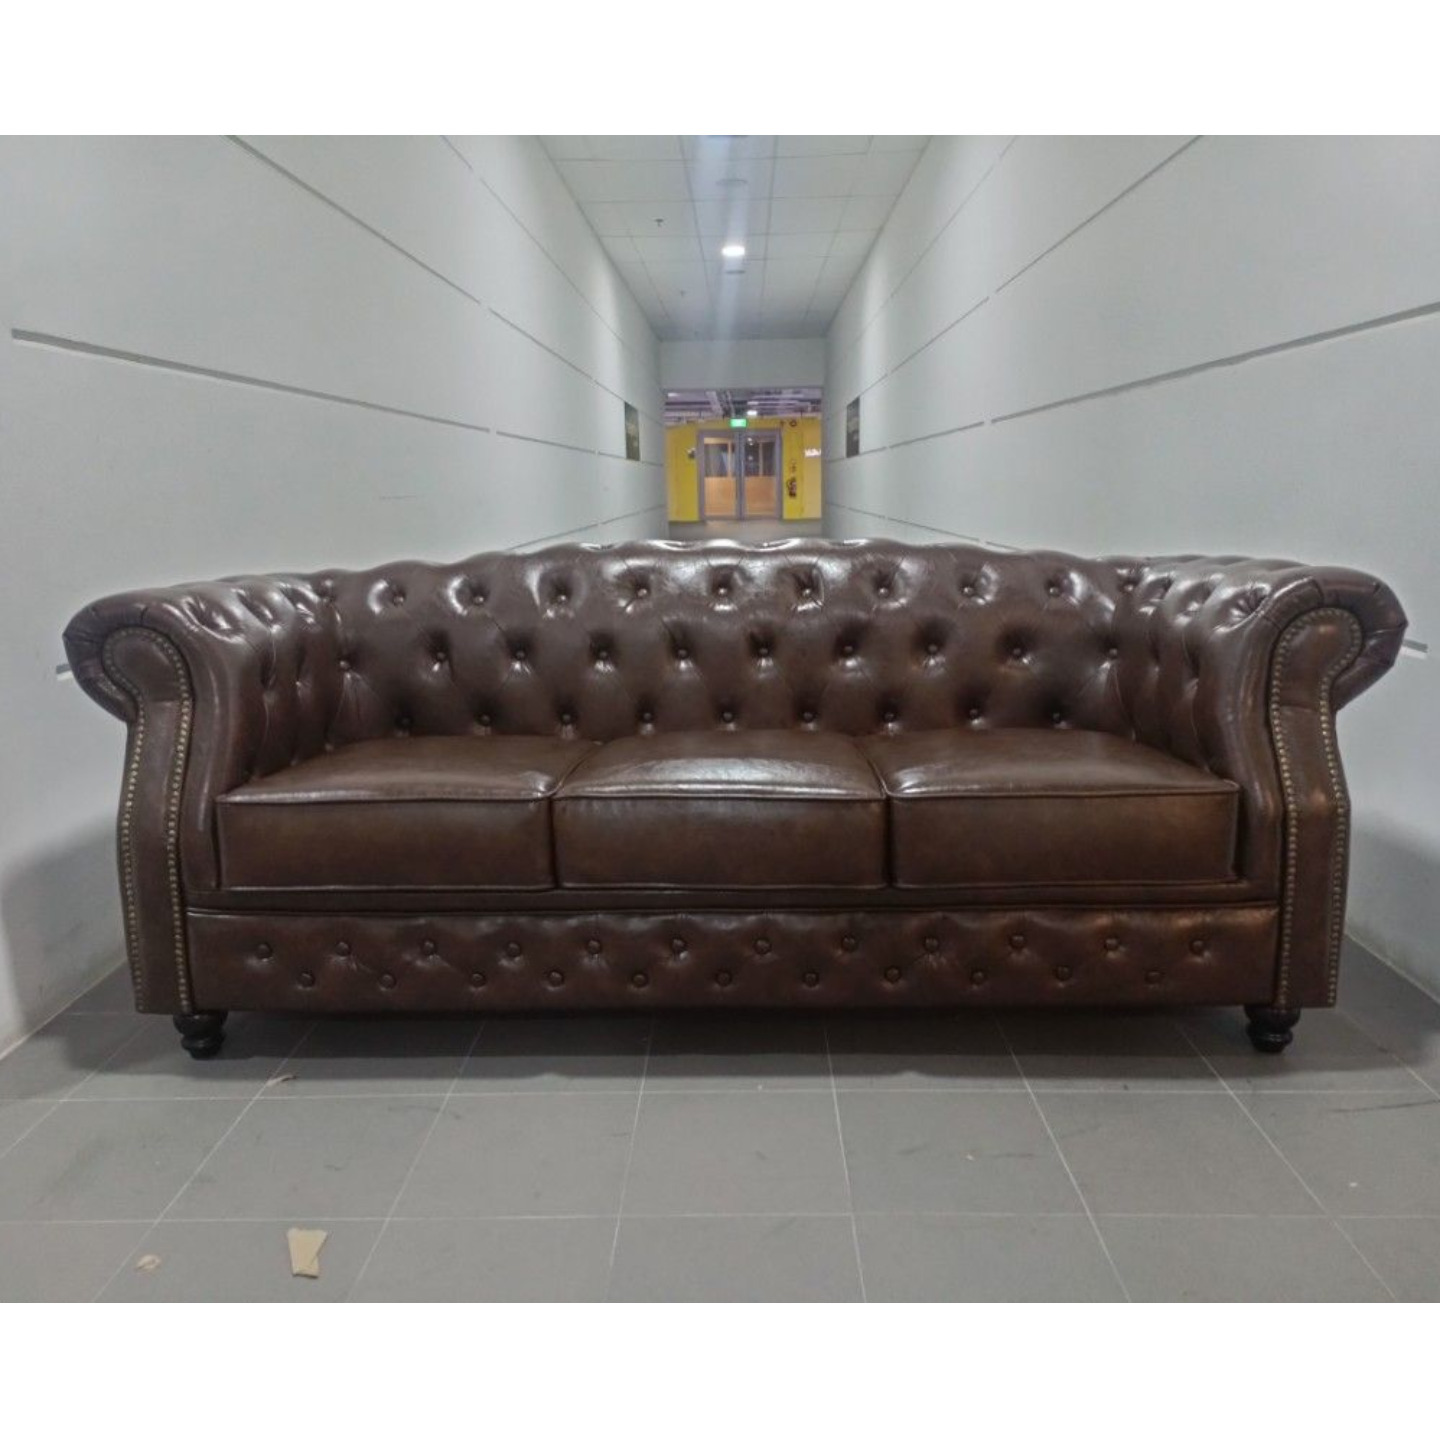 PRE ORDER BOTTEVA 3 Seater Chesterfield Sofa in DARK COCO PU - Estimated Delivery by July 2023